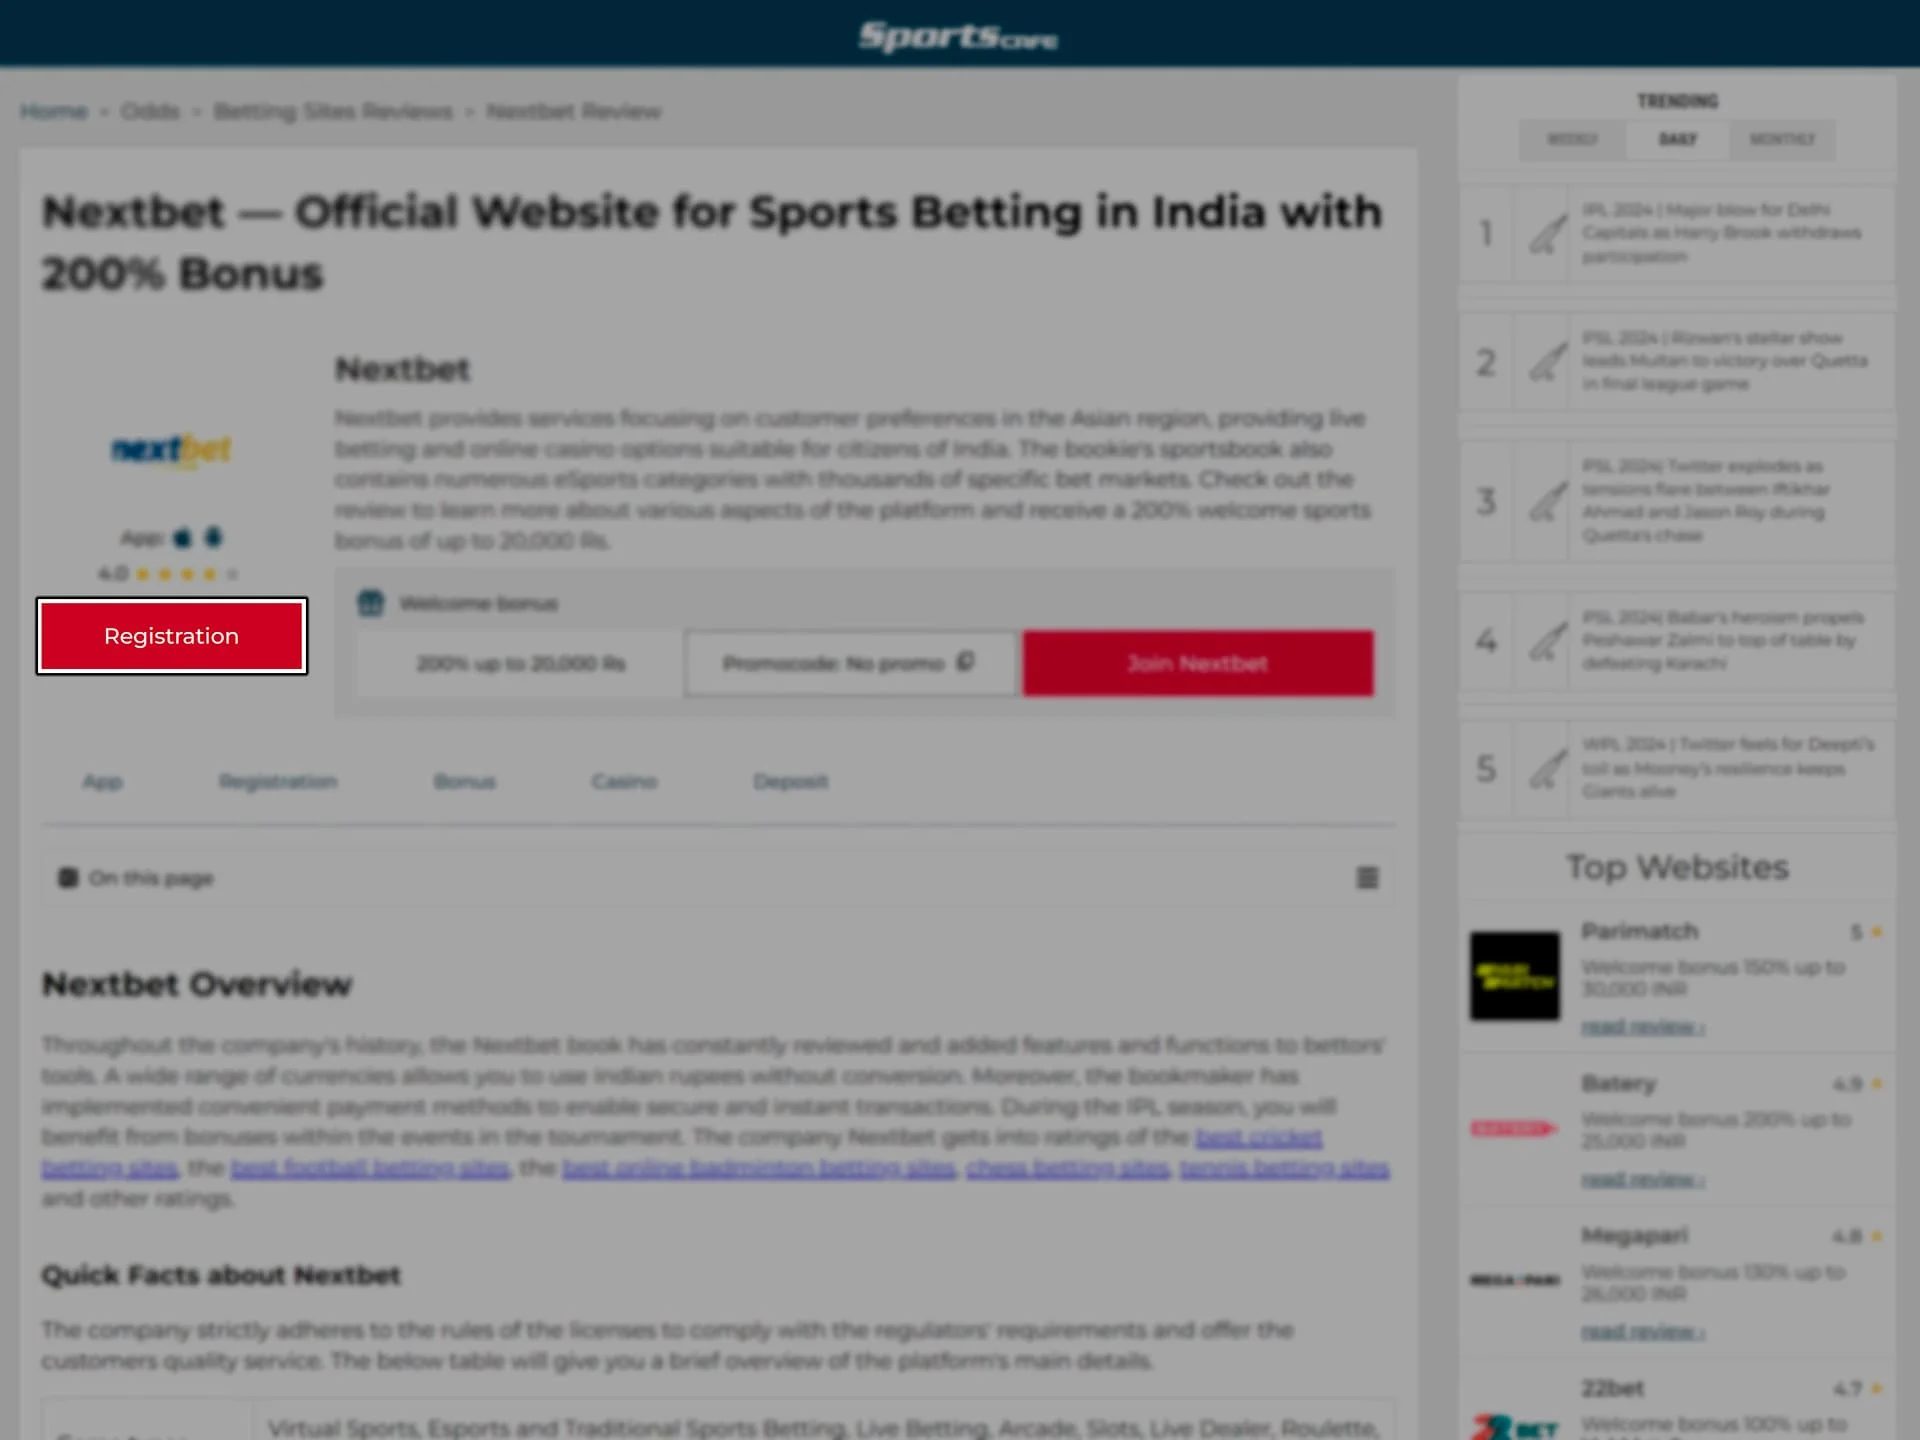 The link in the page header will take you to the official Nextbet website.